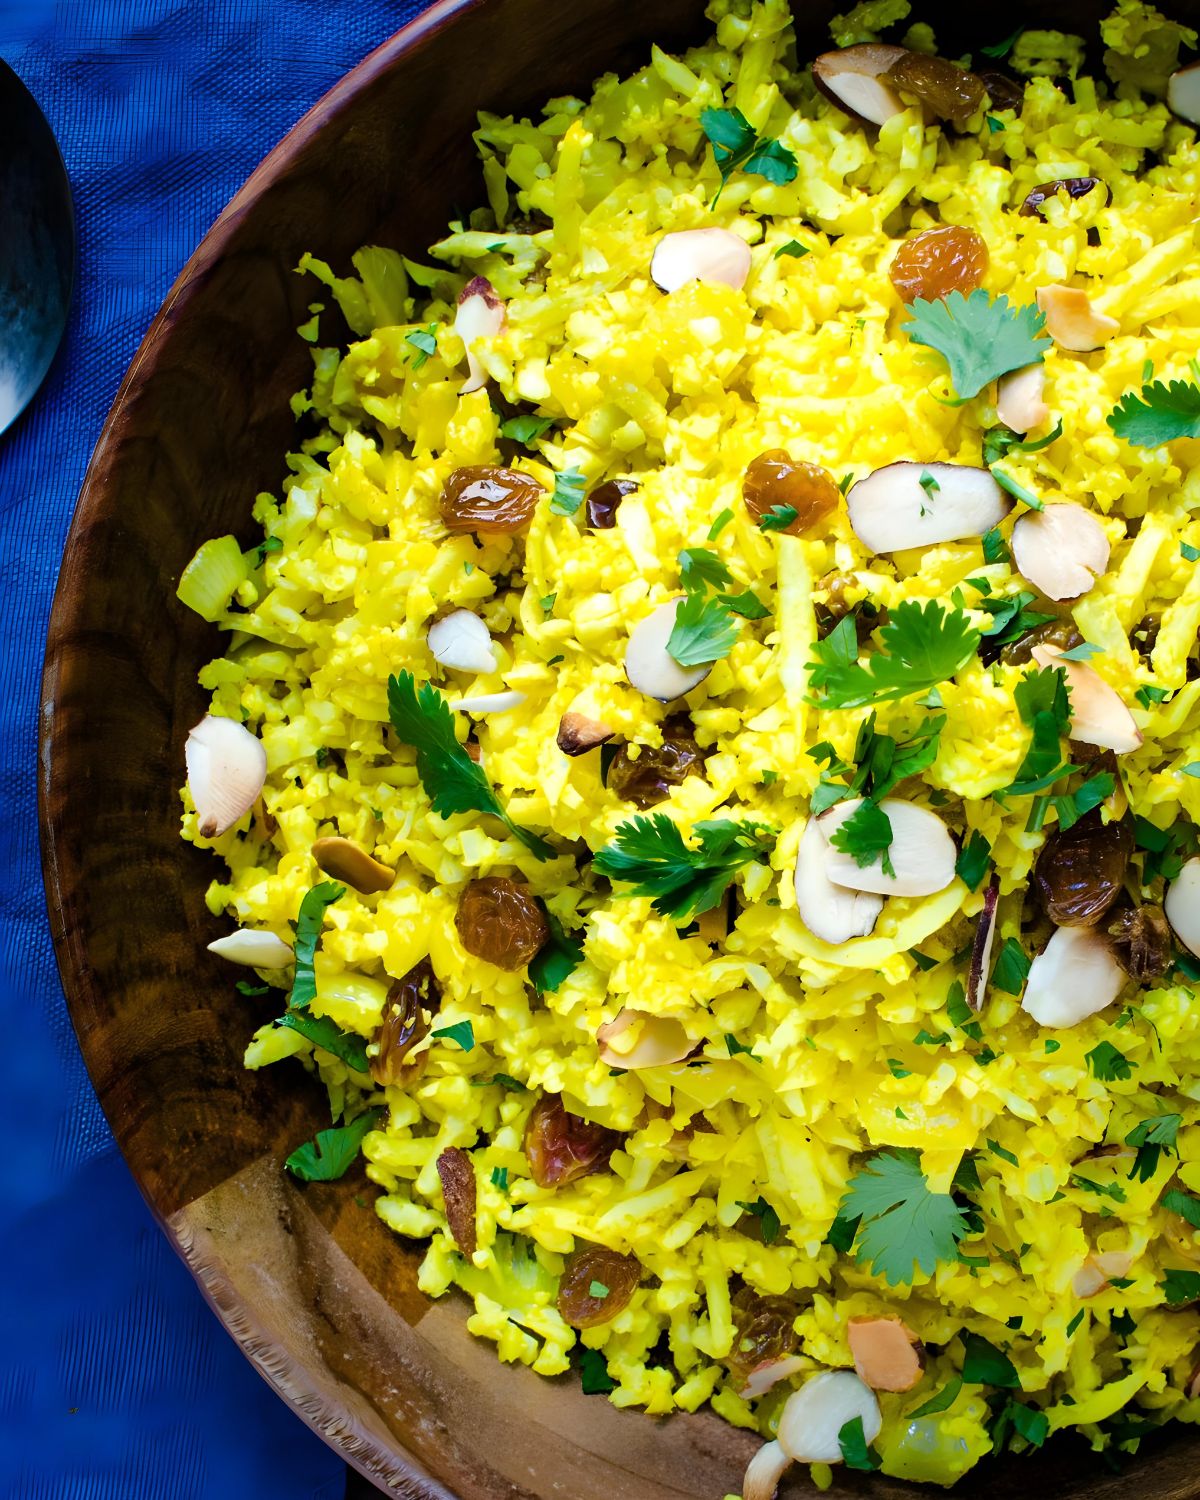 A bowl of curried cauliflower "rice" pilaf.